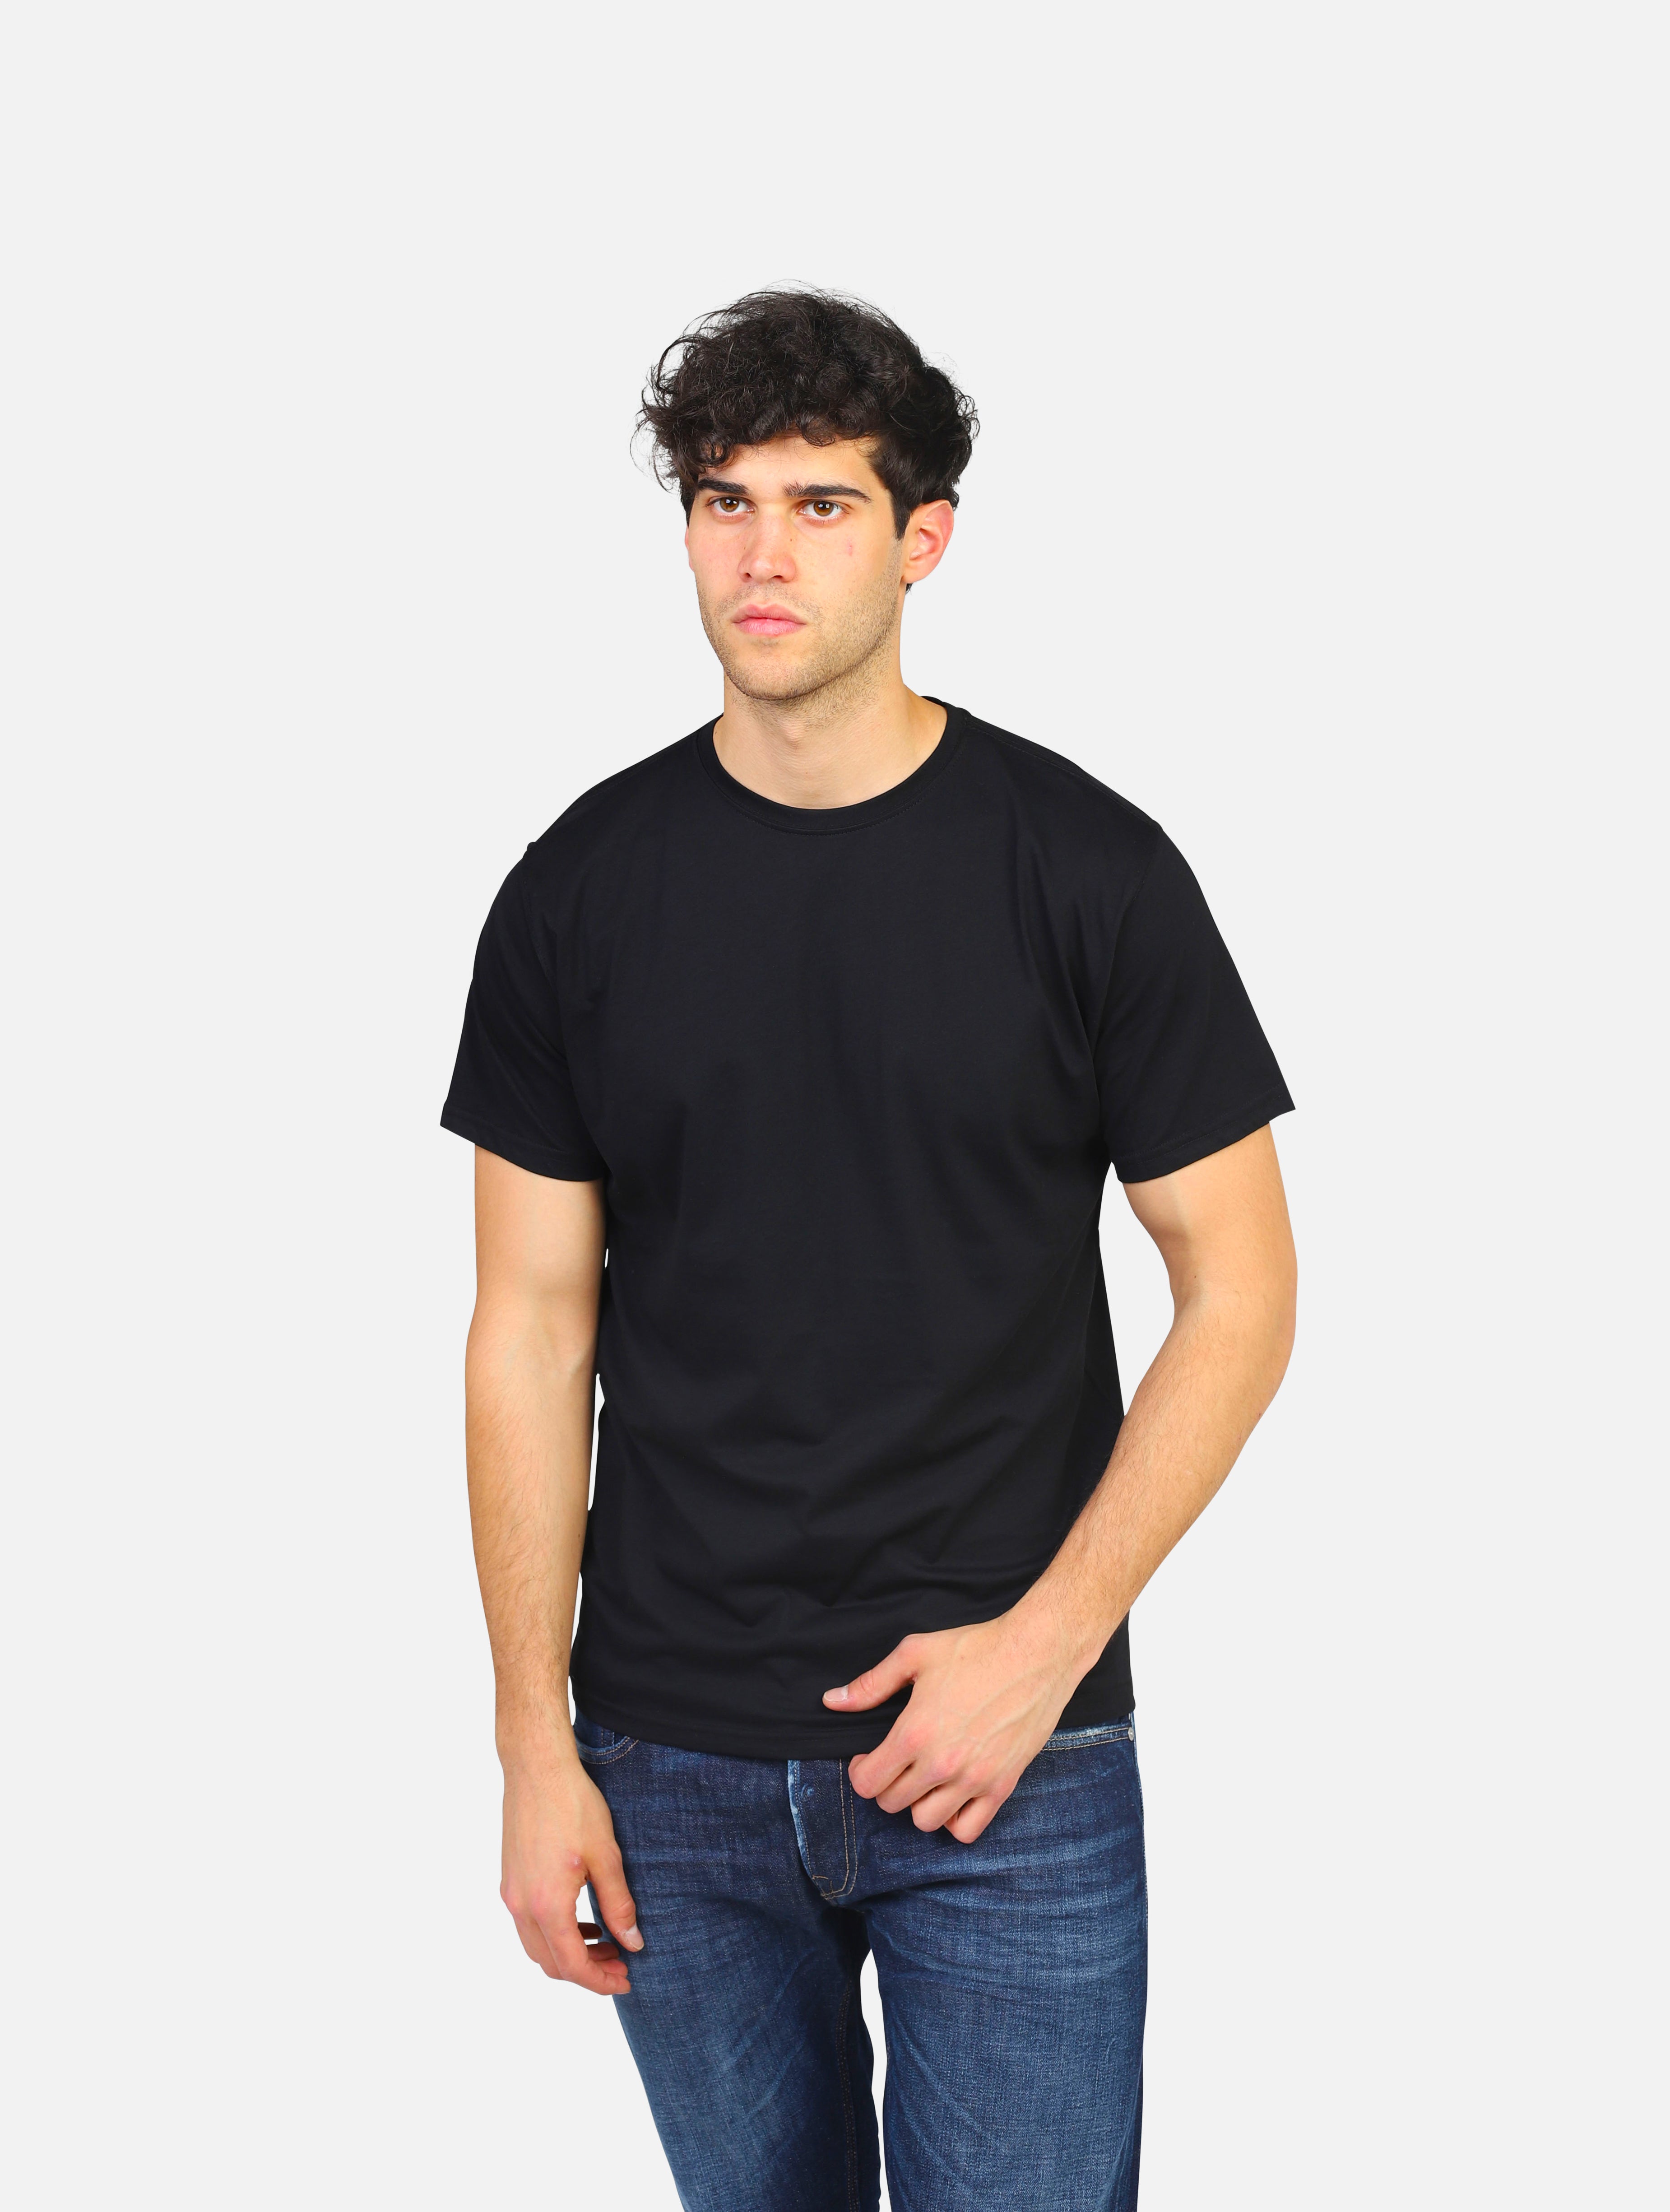 T-shirt outfit -  black uomo  - 1